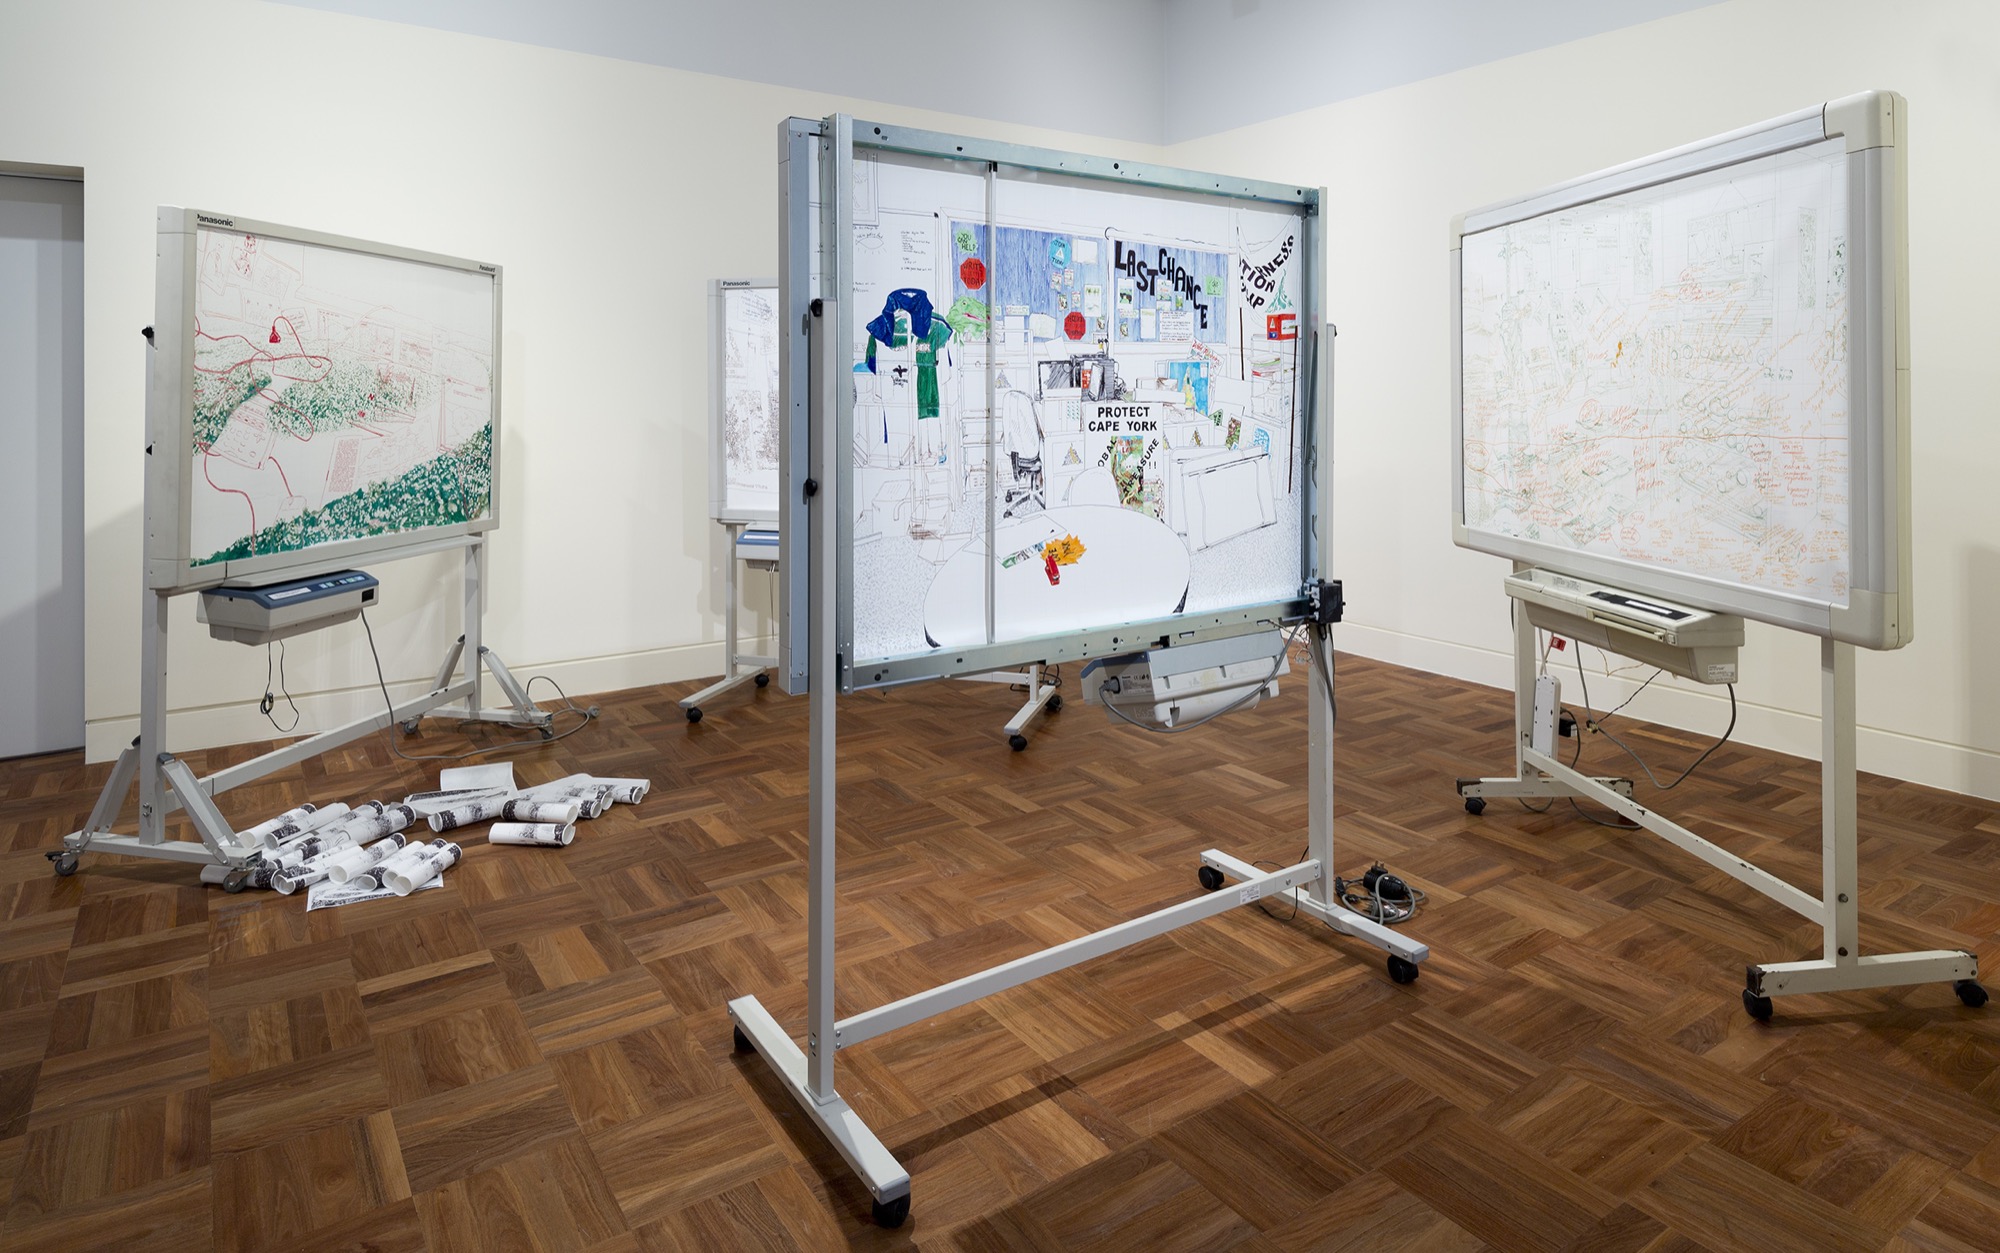 Raquel Ormella, <em>Wild Rivers: Cairns, Brisbane, Sydney</em>, 2008, 4 whiteboards, thermal paper, Texta marker pens, dimensions variable. Monash University Collection. Purchased 2008. Photo: Christian Capurro.